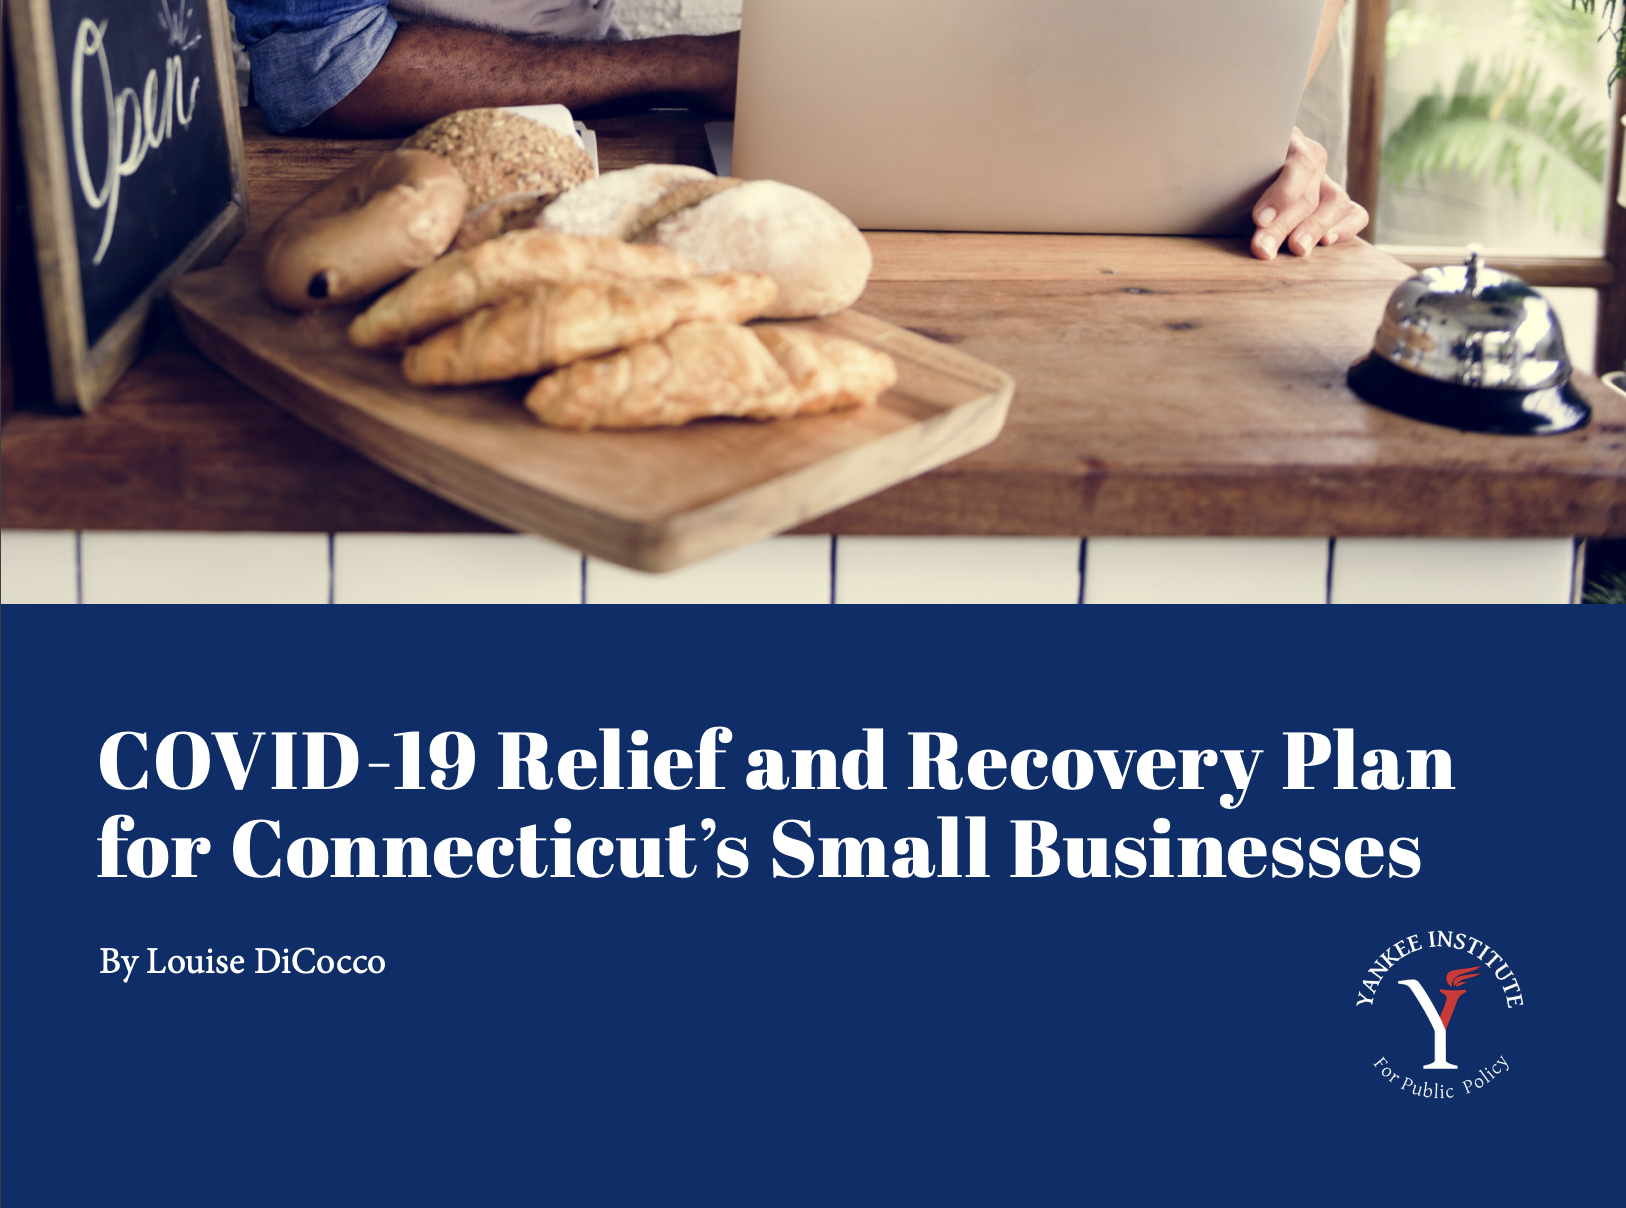 COVID-19 Relief and Recovery Plan for Connecticut’s Small Businesses